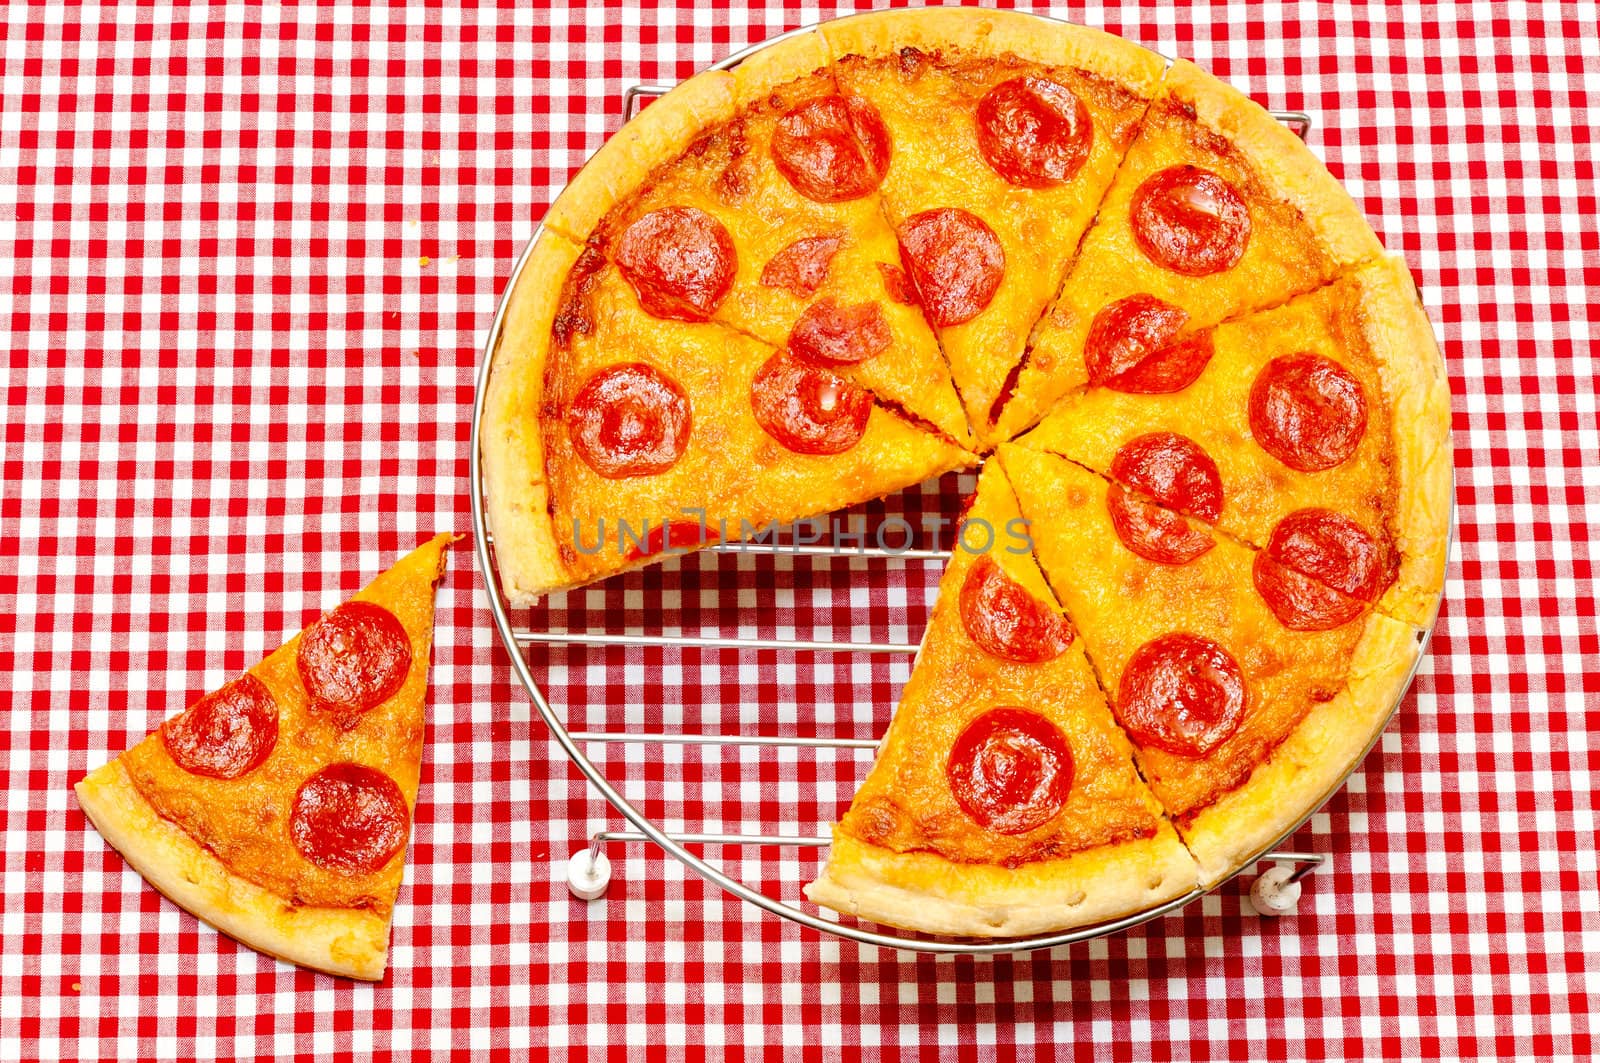 Whole Pepperoni Pizza with Slice Removed by dehooks